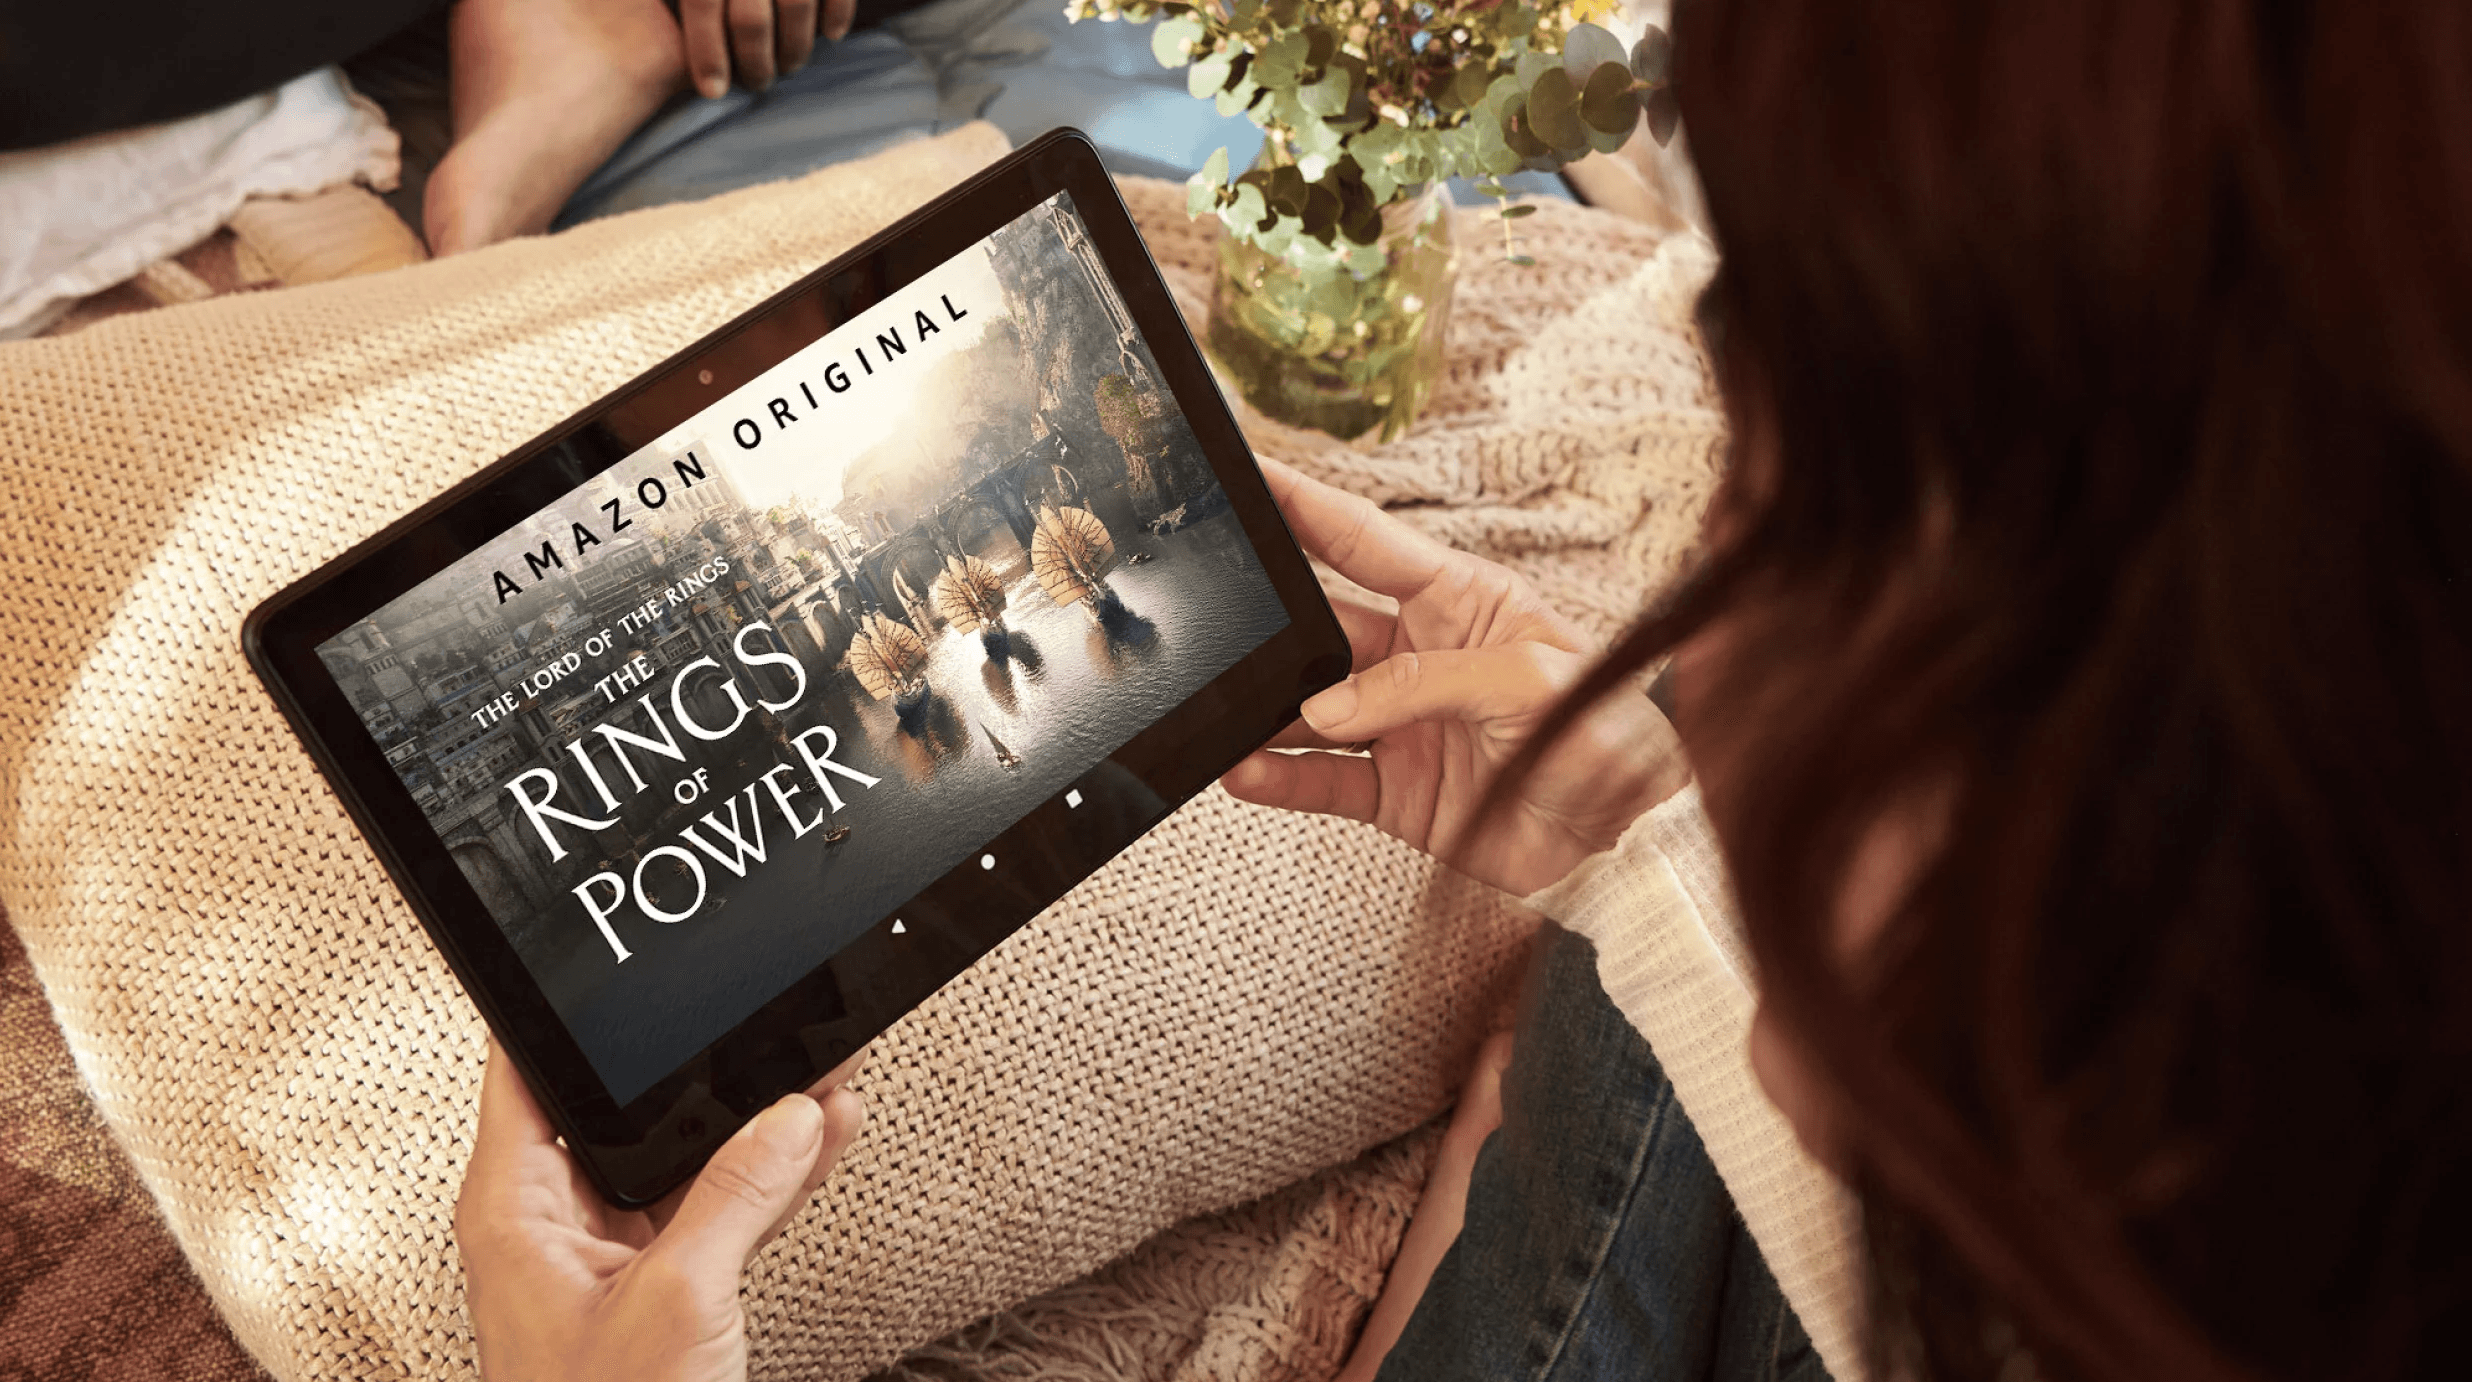 Prime Video Rings of Power / Lord of the Rings - About Amazon Image